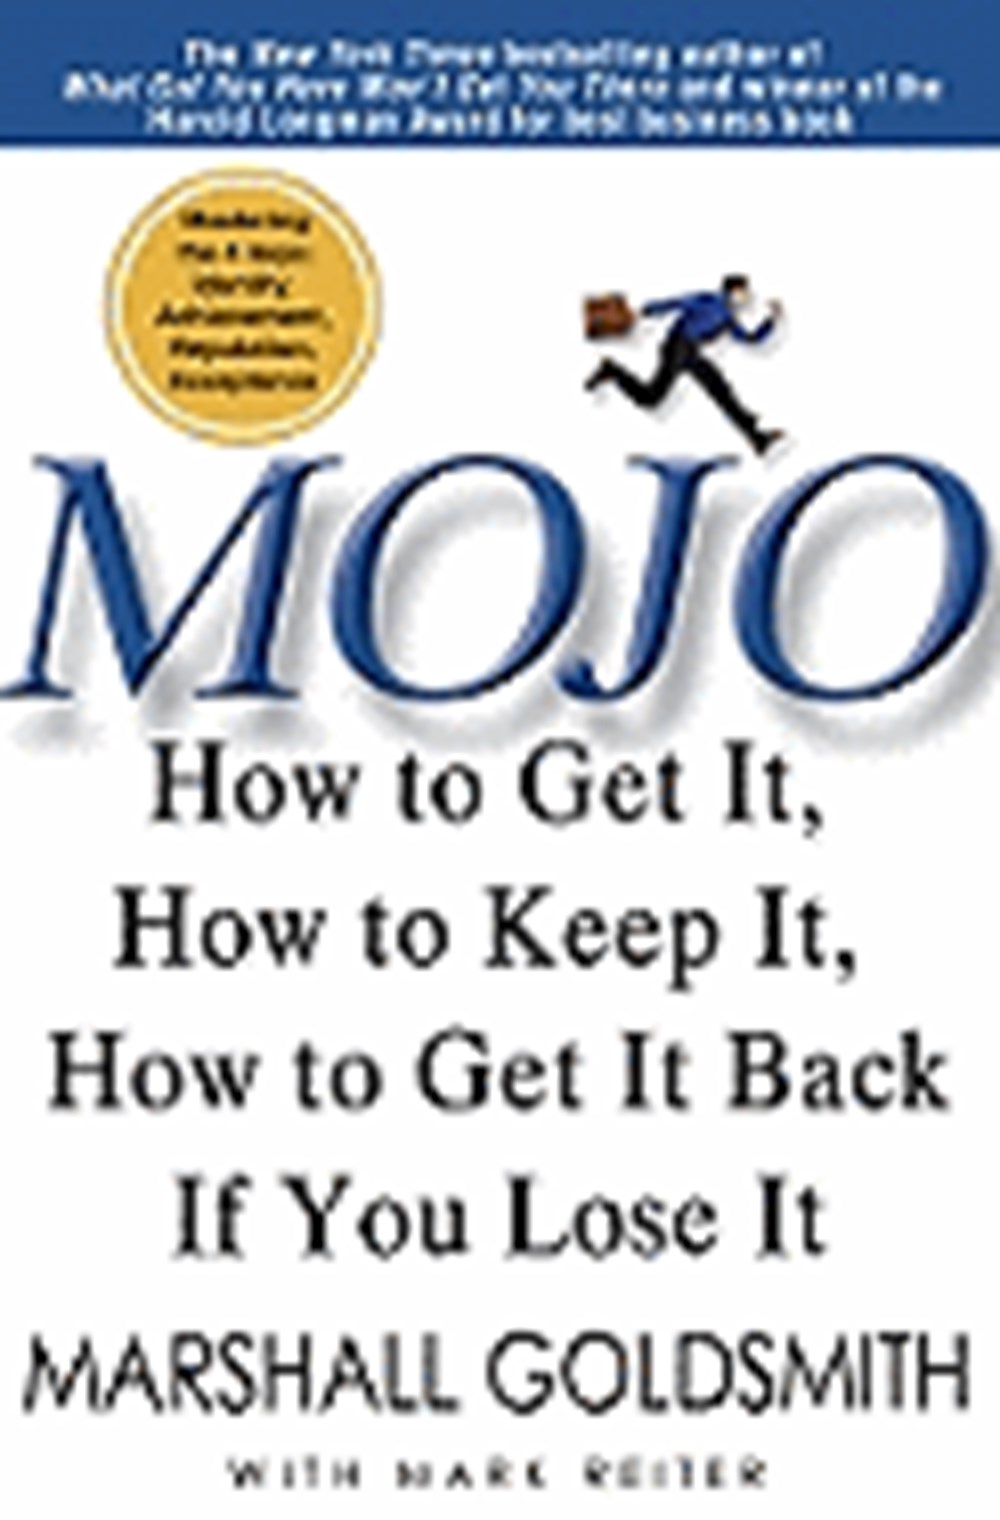 Mojo How to Get It, How to Keep It, How to Get It Back If You Lose It